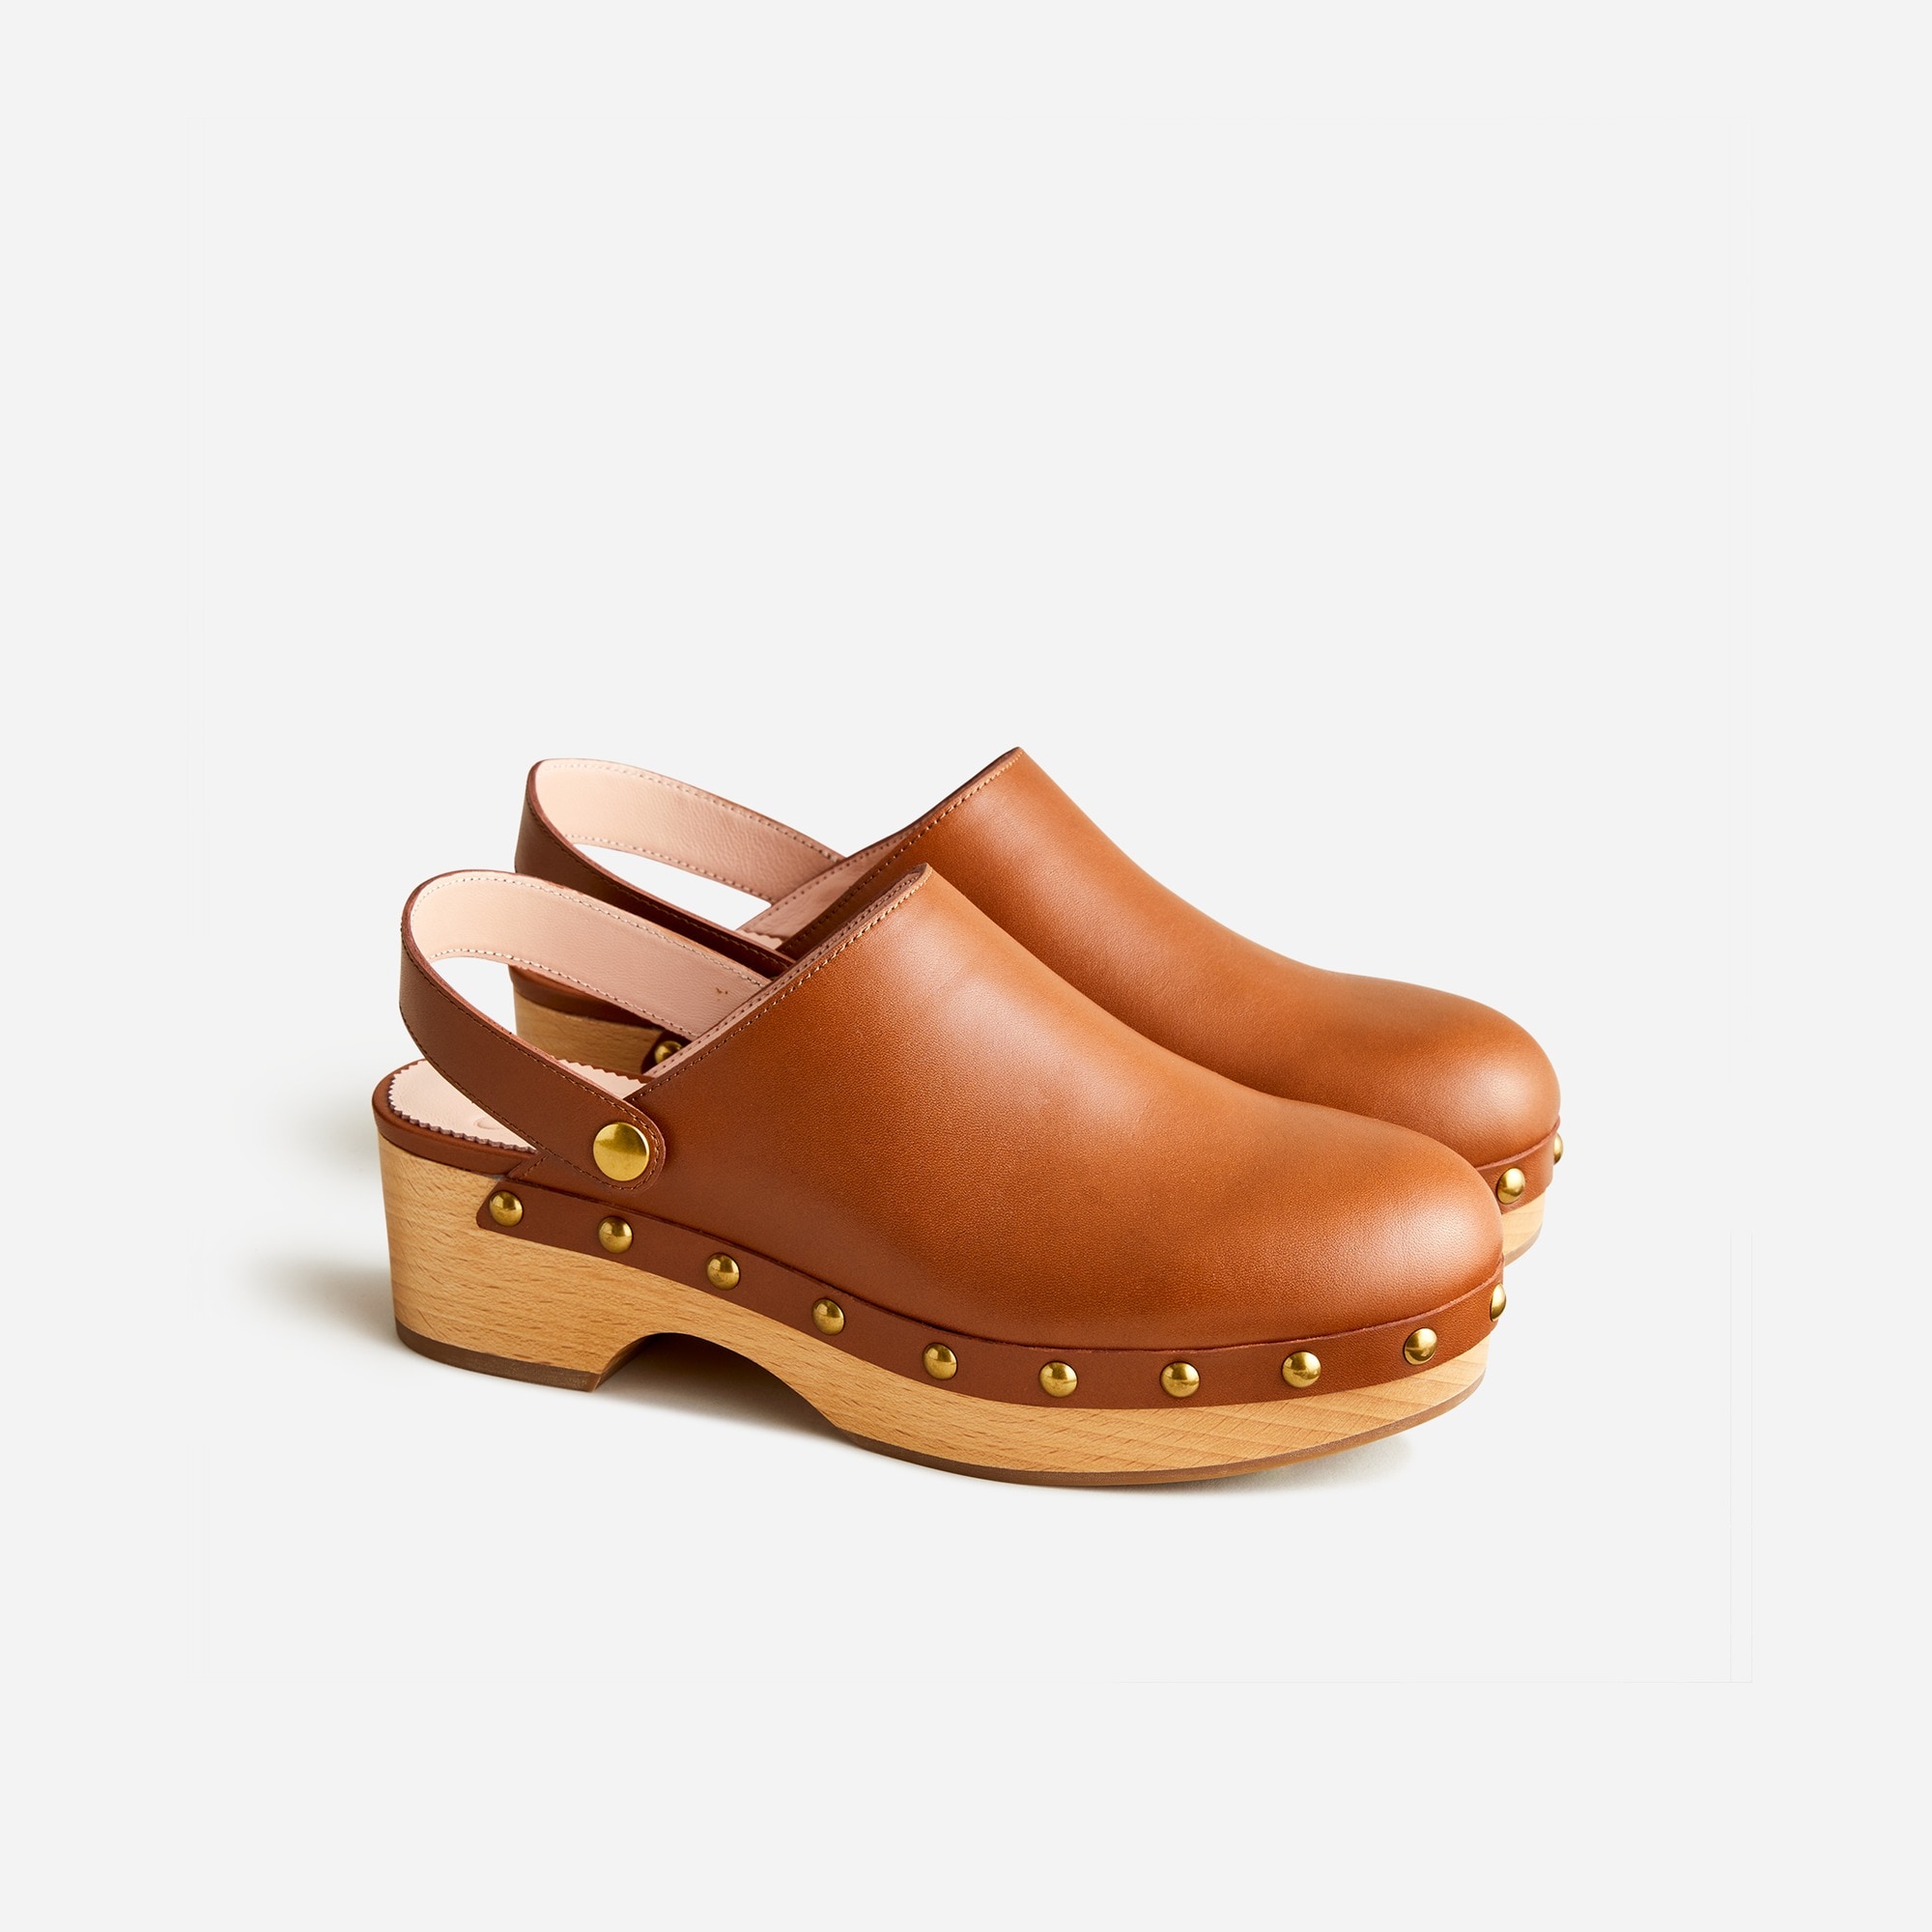 Birkenstock Boston Clogs Are the Shoe of the Summer